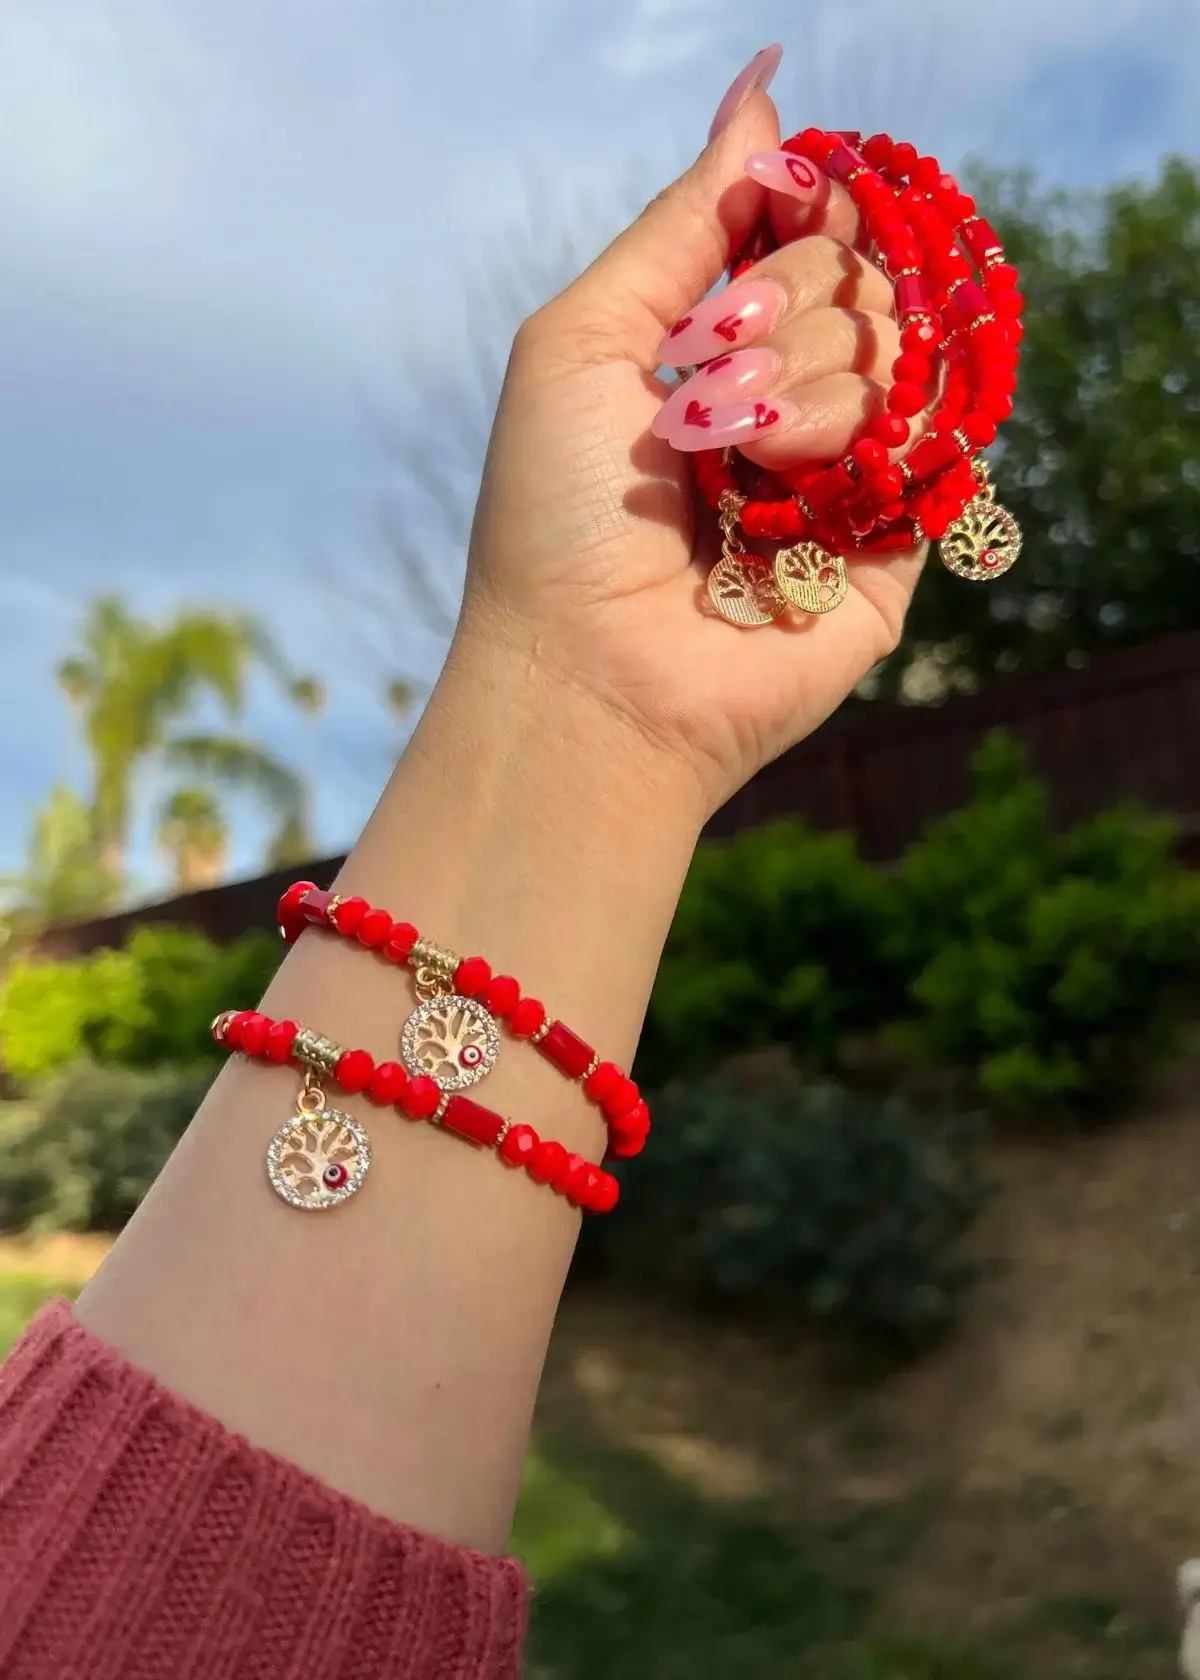 How to choose the right red mexican bracelet?